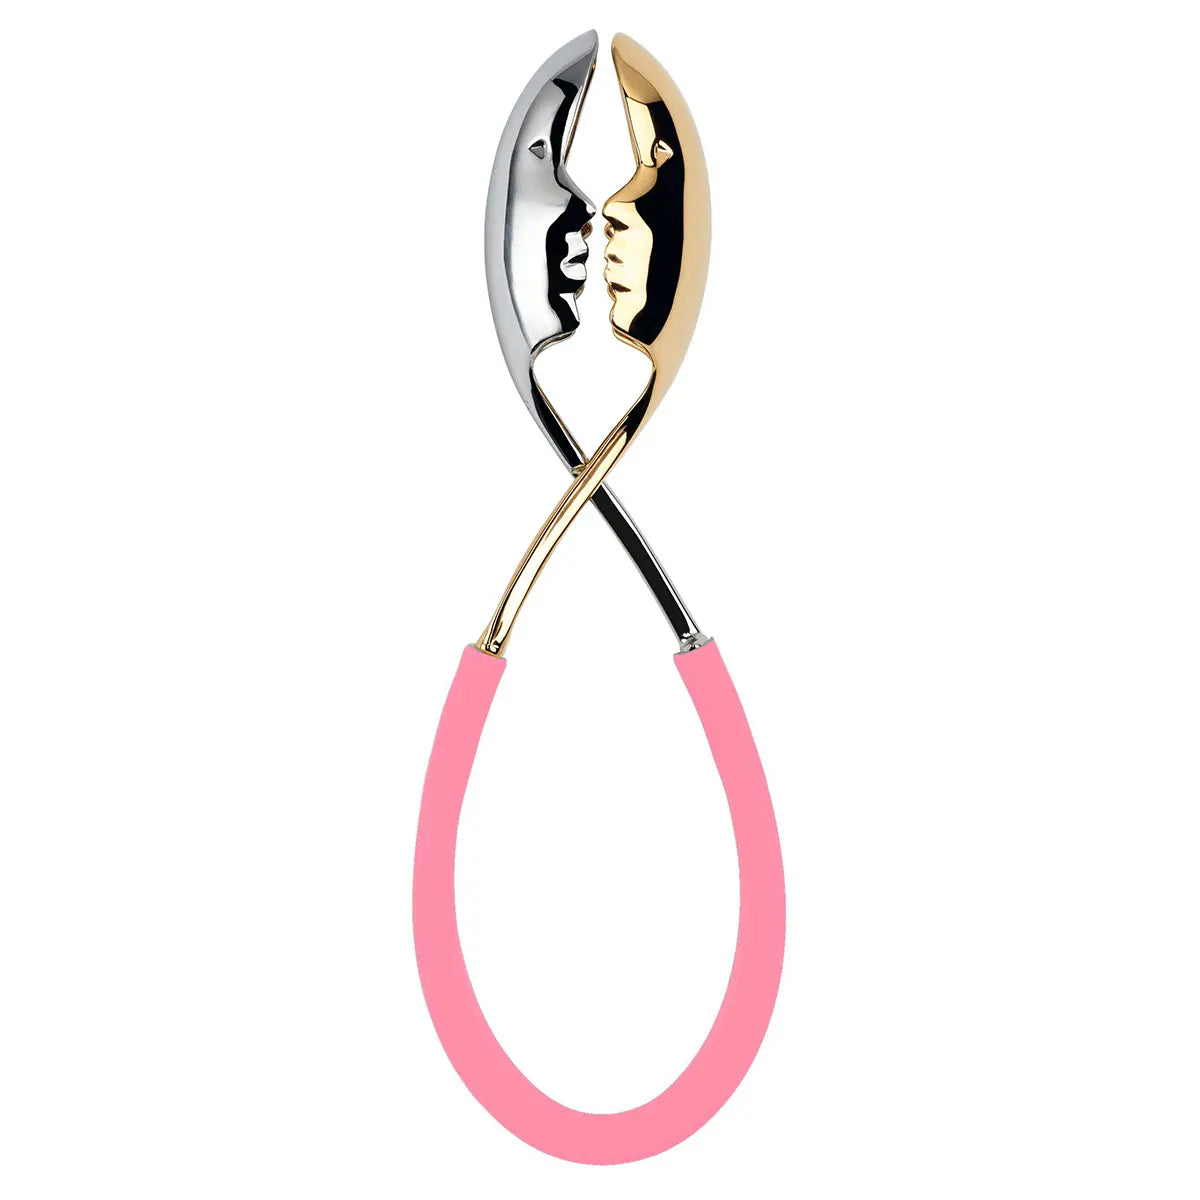 Casa Bugatti Kiss Colored Polypropylene with Gold Salad Tongs in Pink